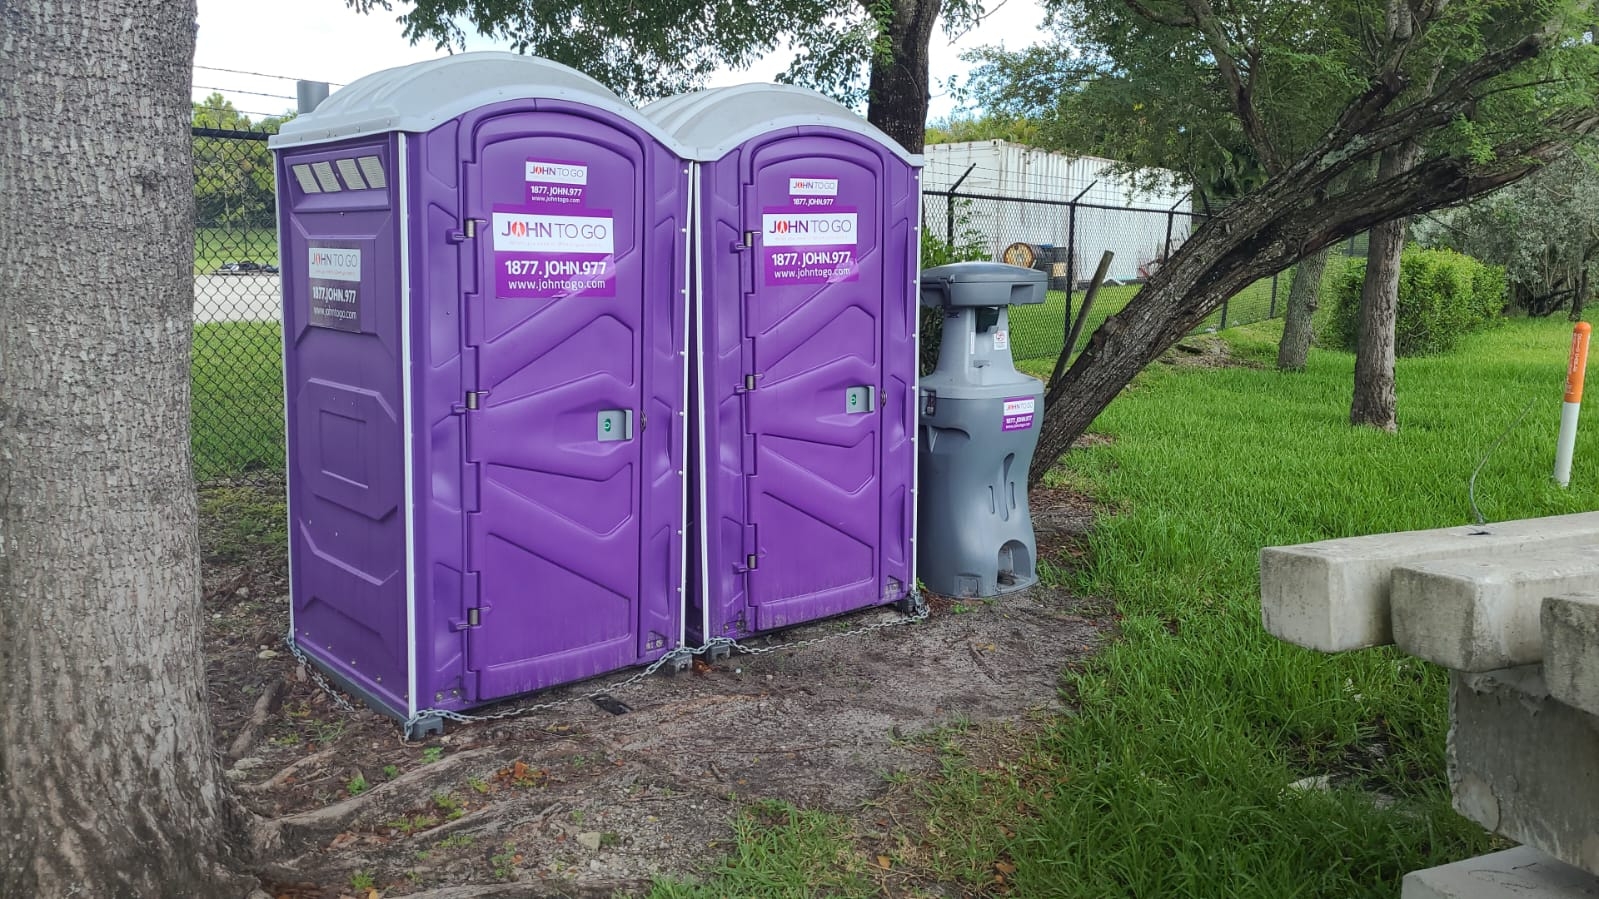 Florida portable hand washing station with event porta potties nearby